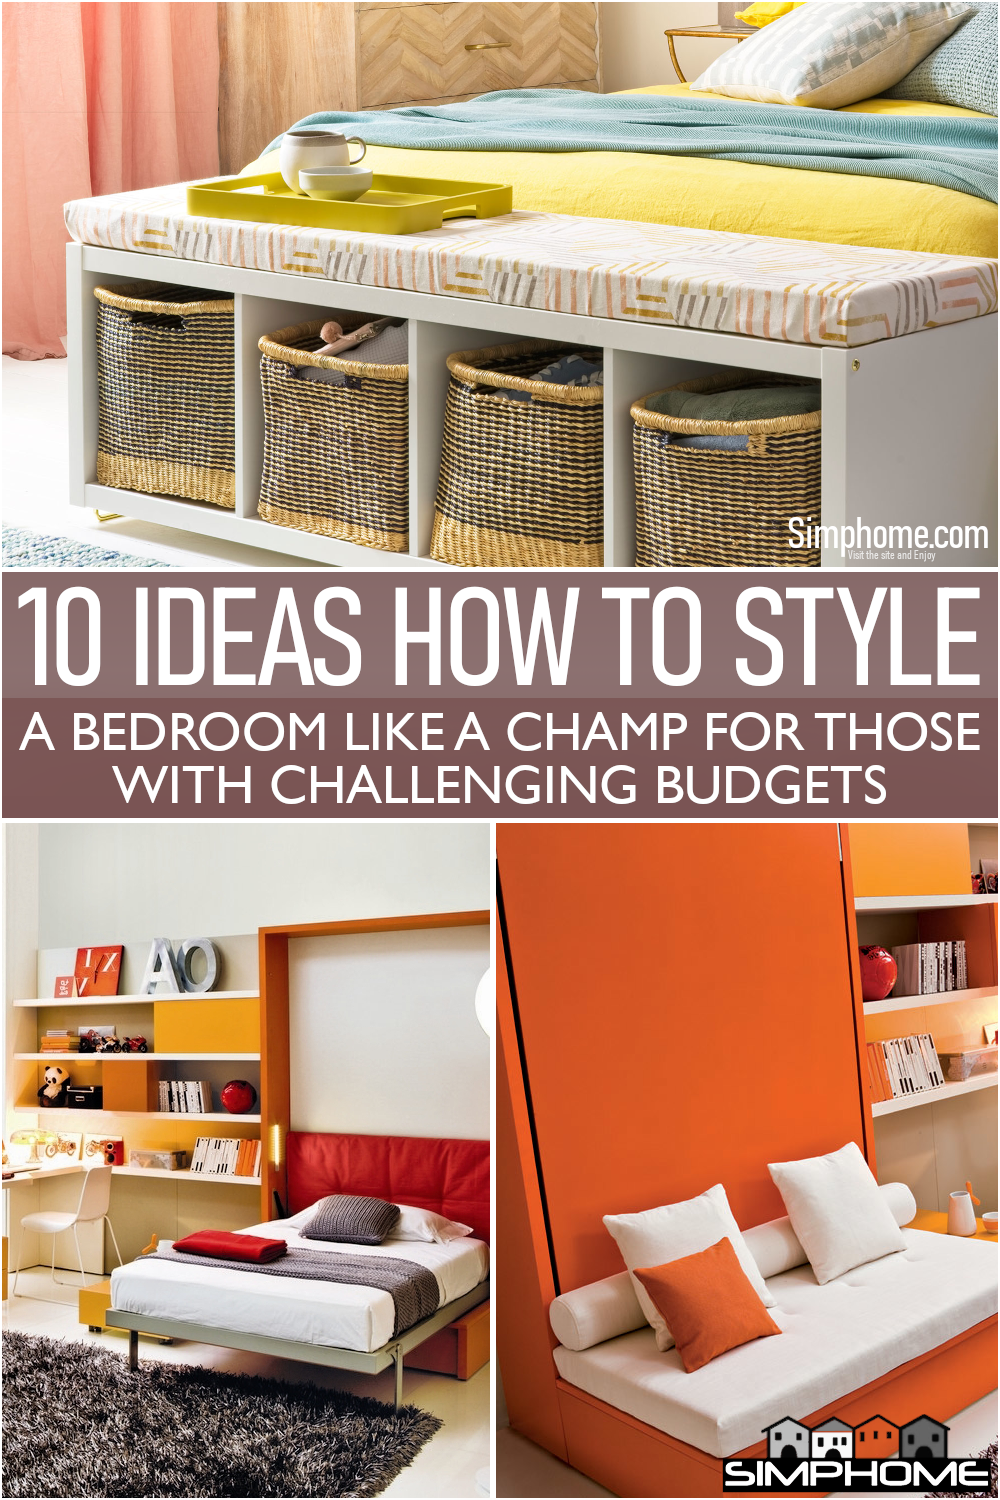 This poster will give you 10 Ideas How to Style A Bedroom Like A Cham